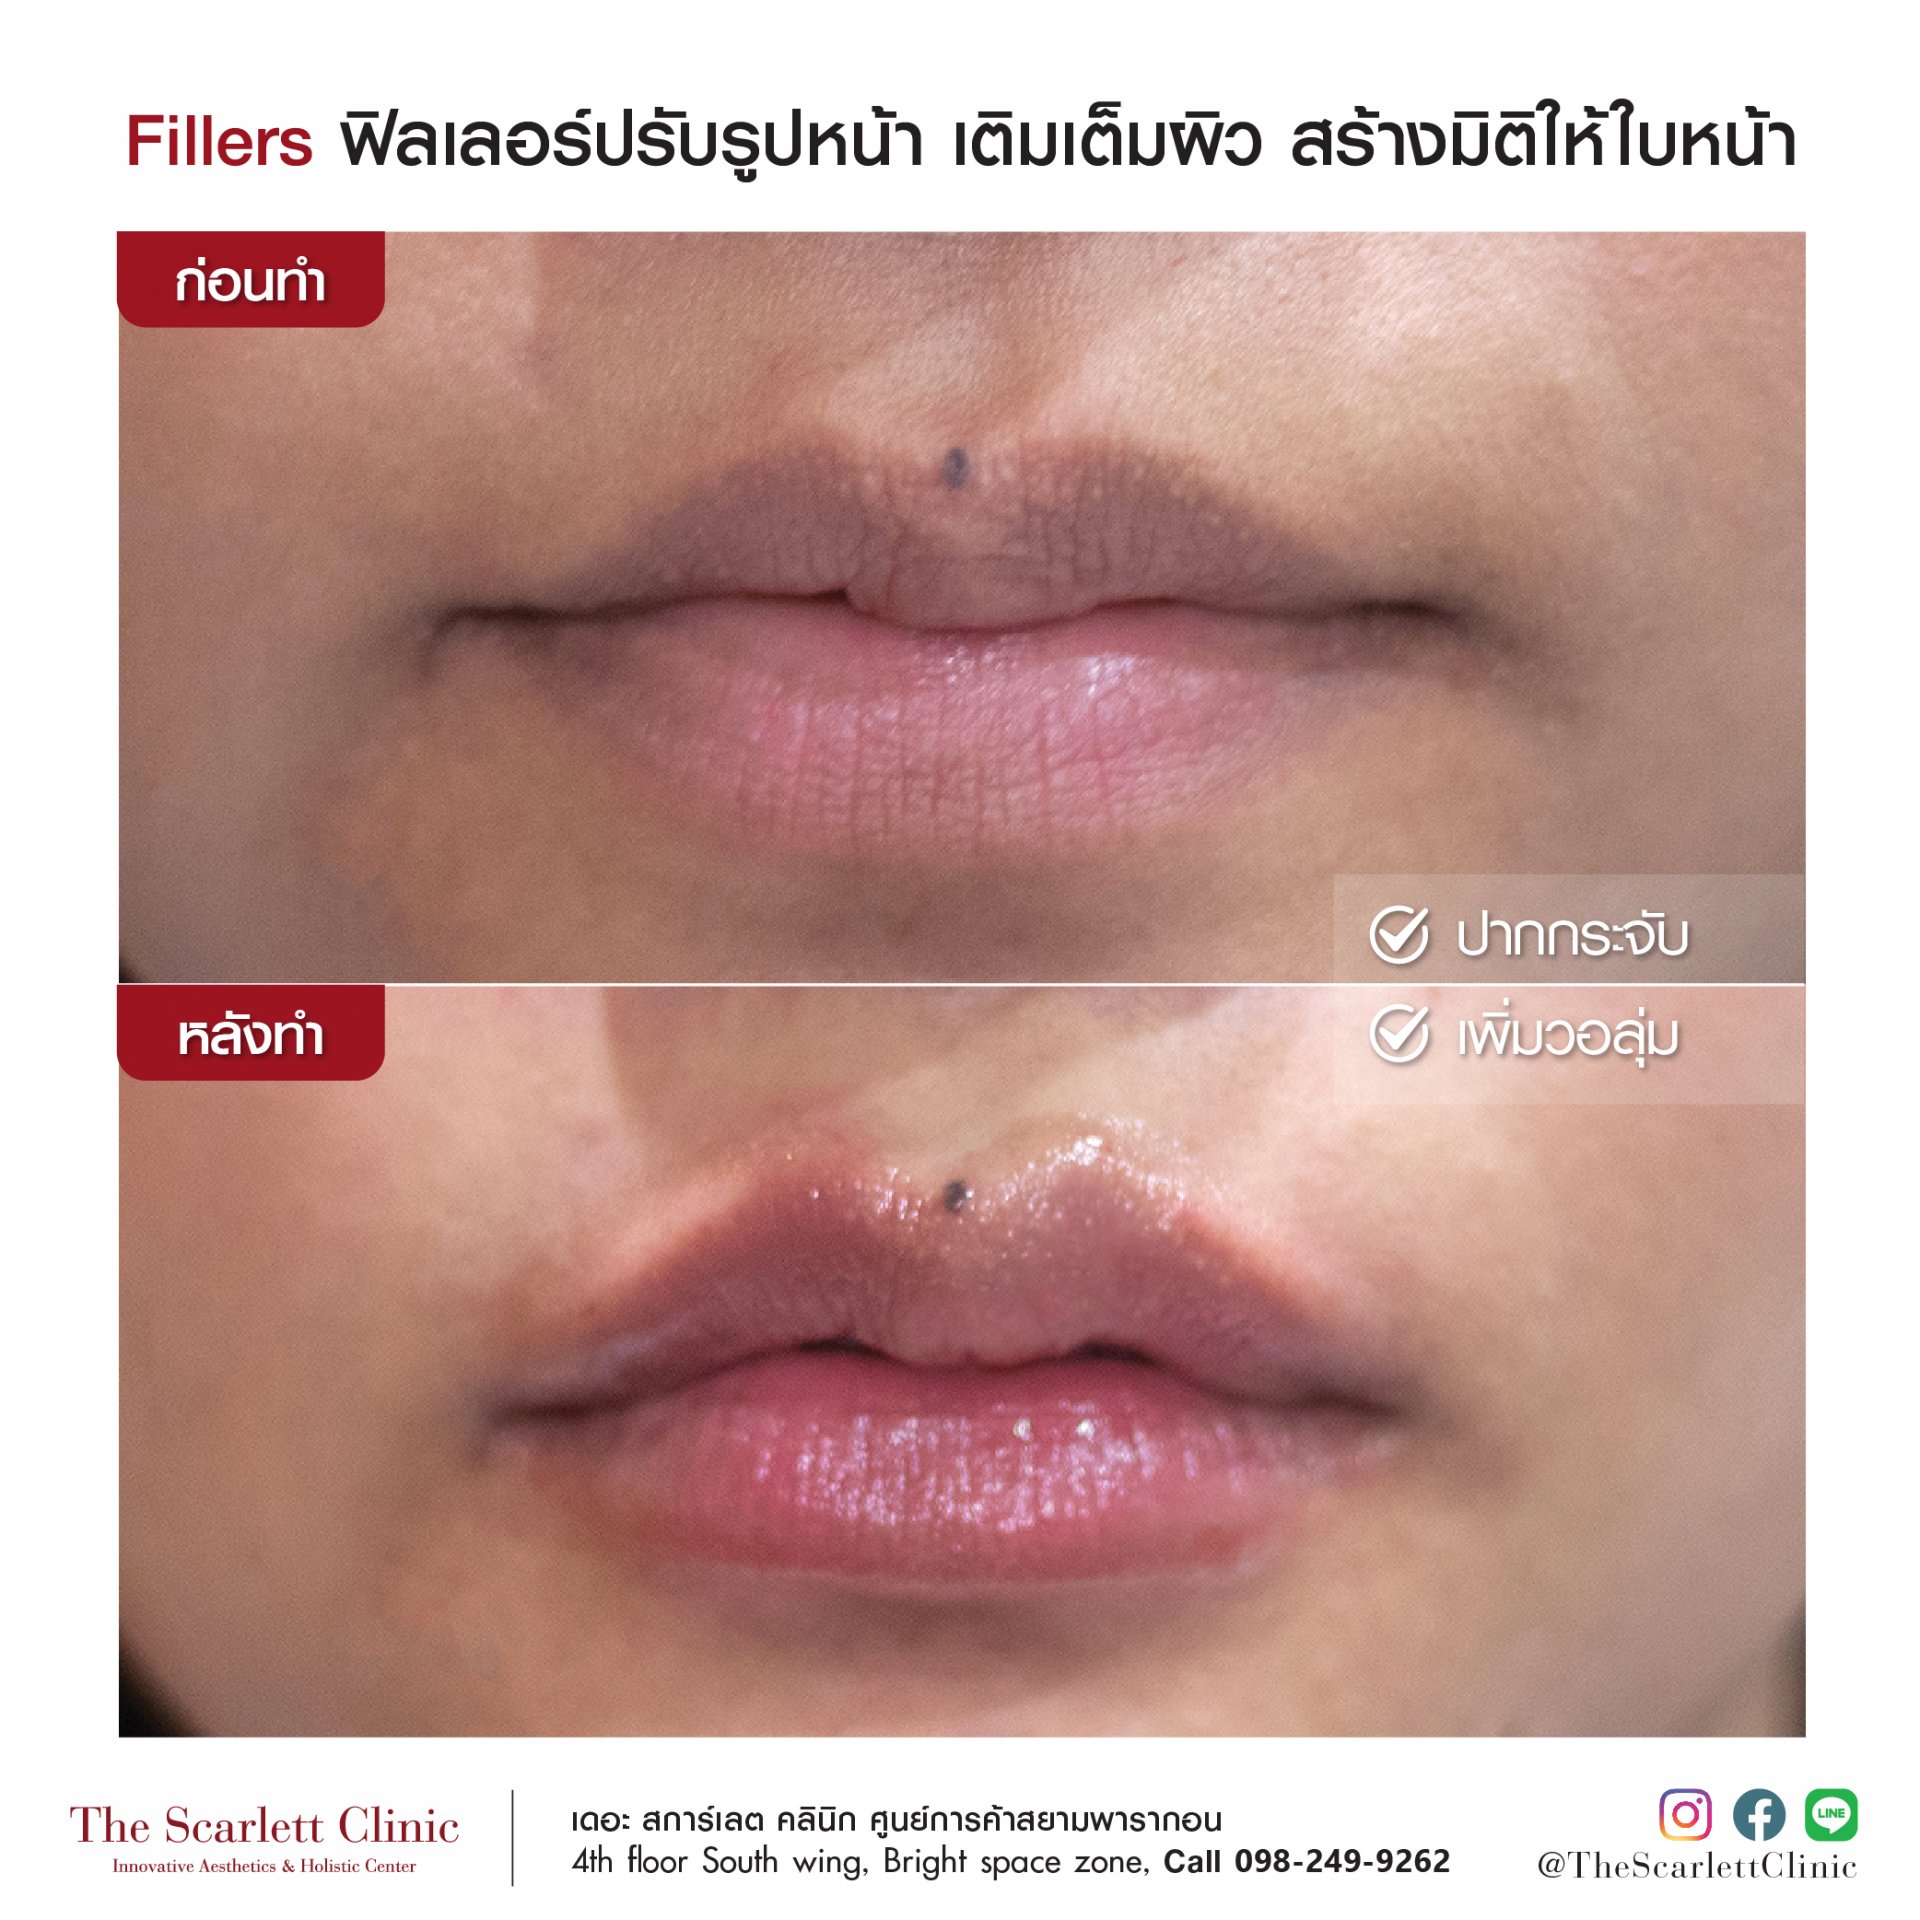 Review Facial Design by Fillers